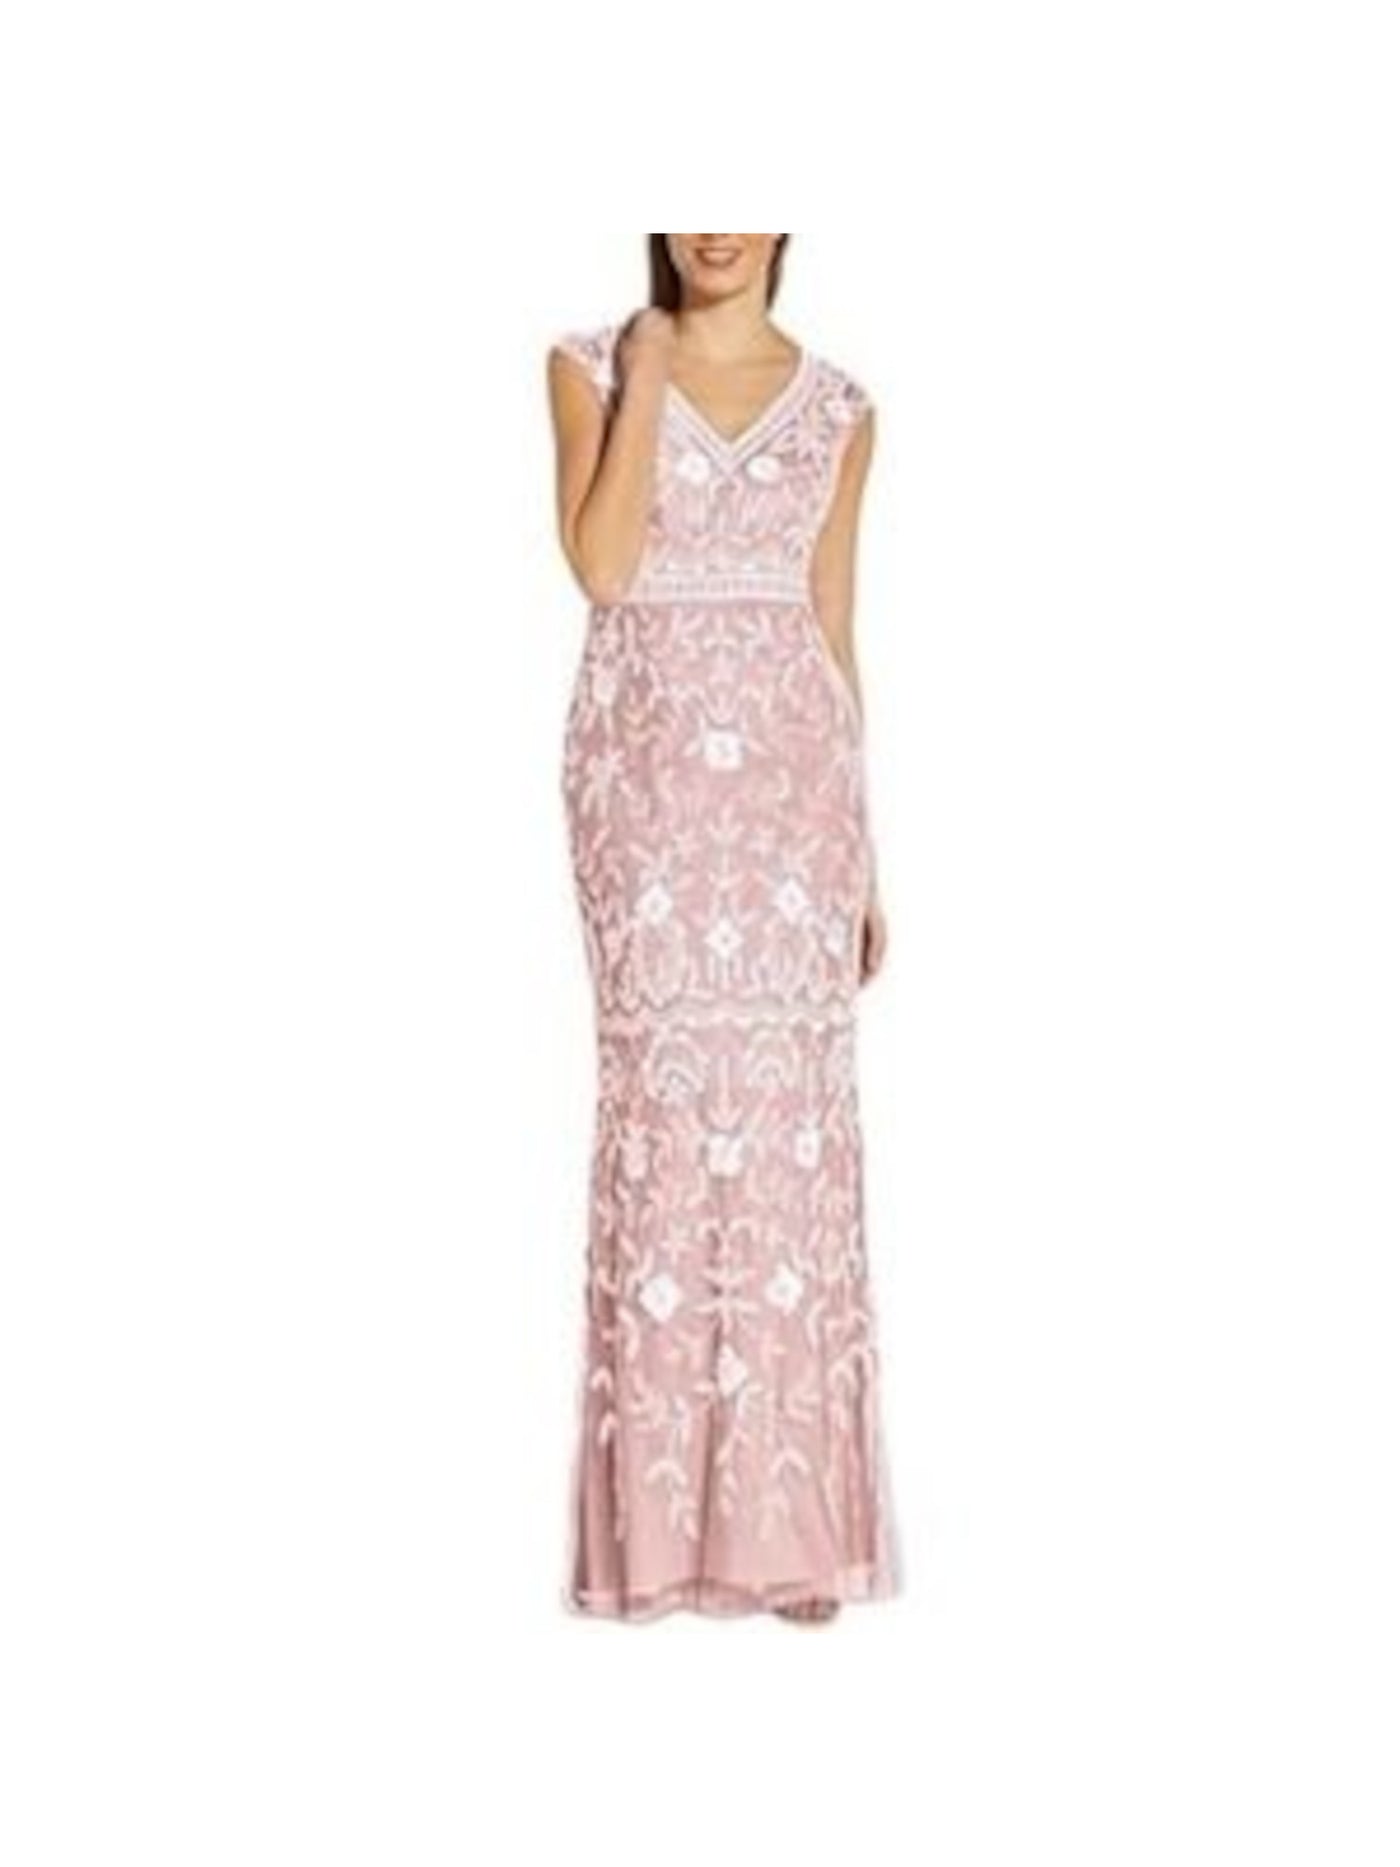 ADRIANNA PAPELL Womens Pink Embellished Zippered Lined Cap Sleeve V Neck Full-Length Formal Mermaid Dress 2